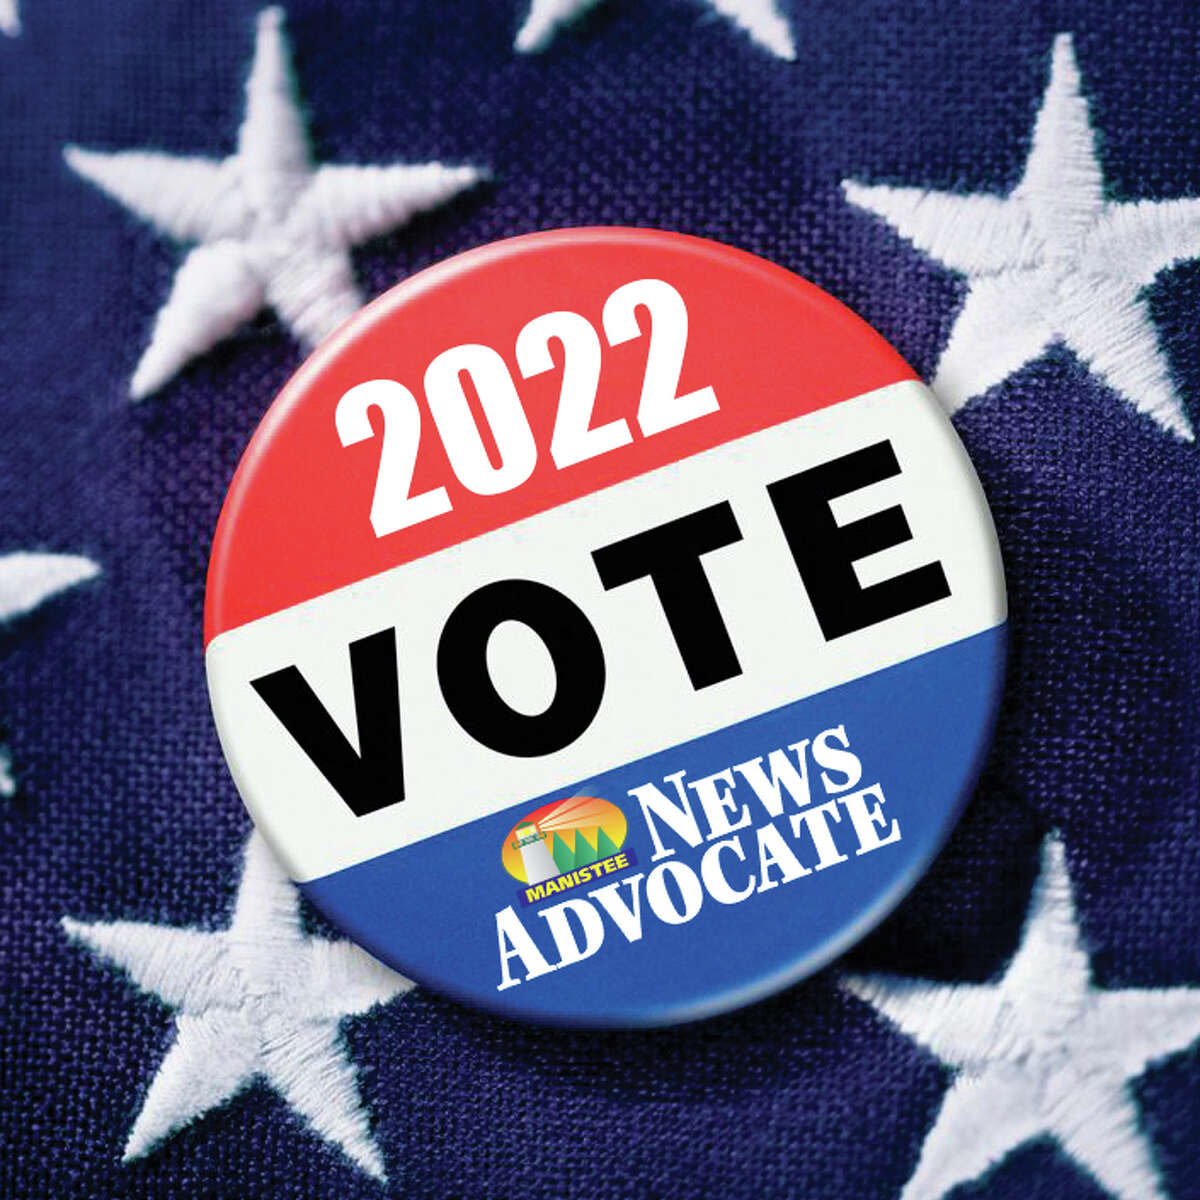 Michigan's primary election will take place on Aug. 2, 2022.